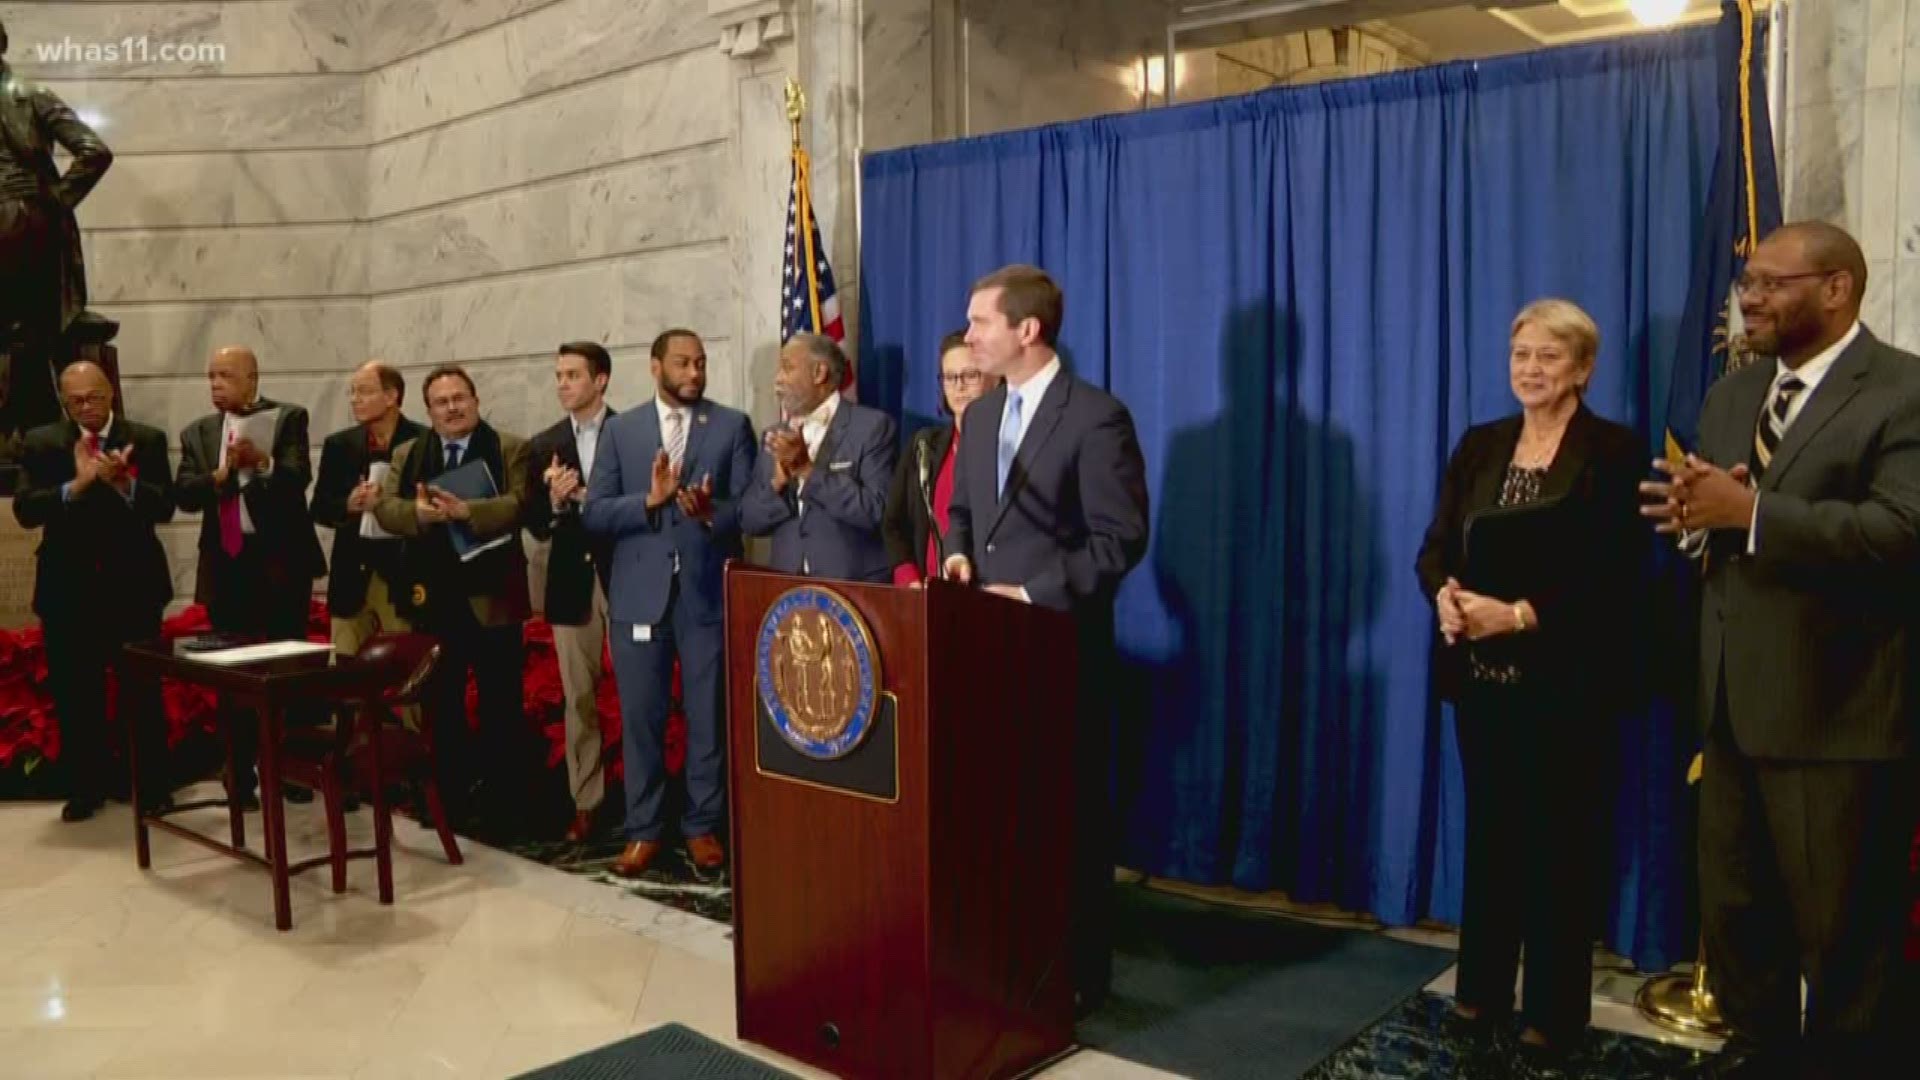 Gov. Beshear signed an executive order to restore voting rights to nonviolent felons who have served their sentences.